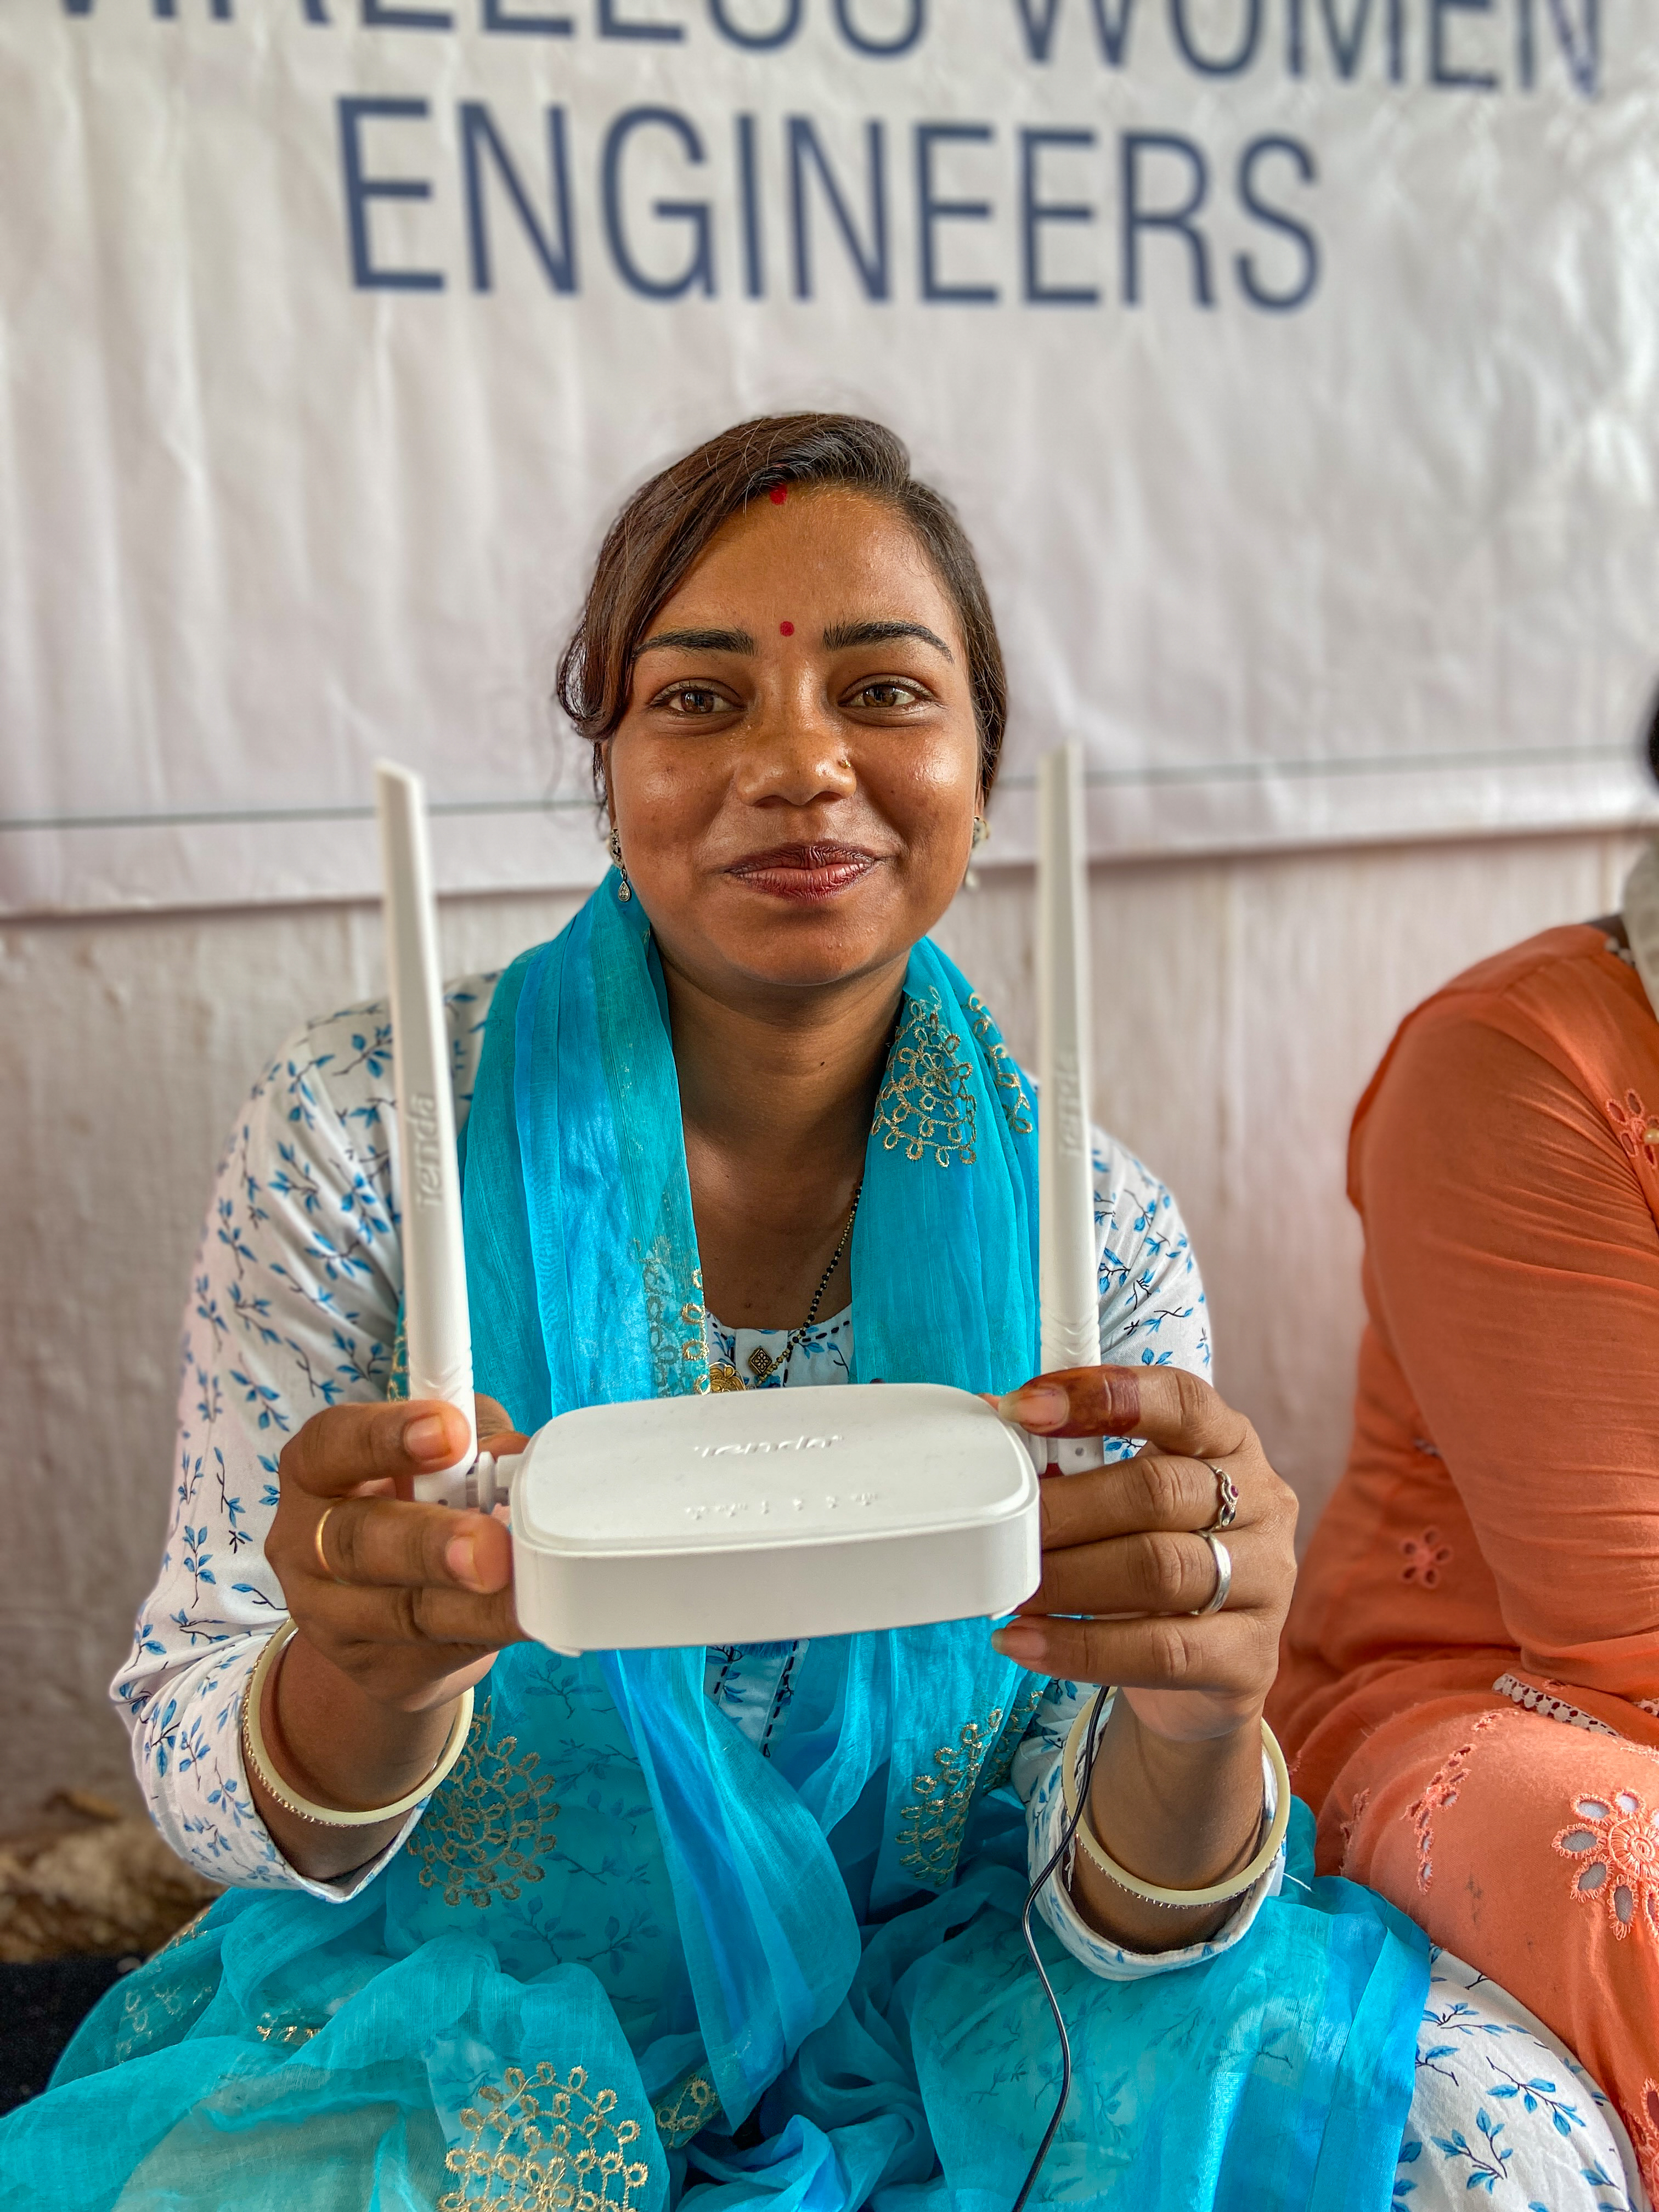 A woman in rural India shows the wireless network router she uses during training under DEF’s Women Wireless Engineers programme